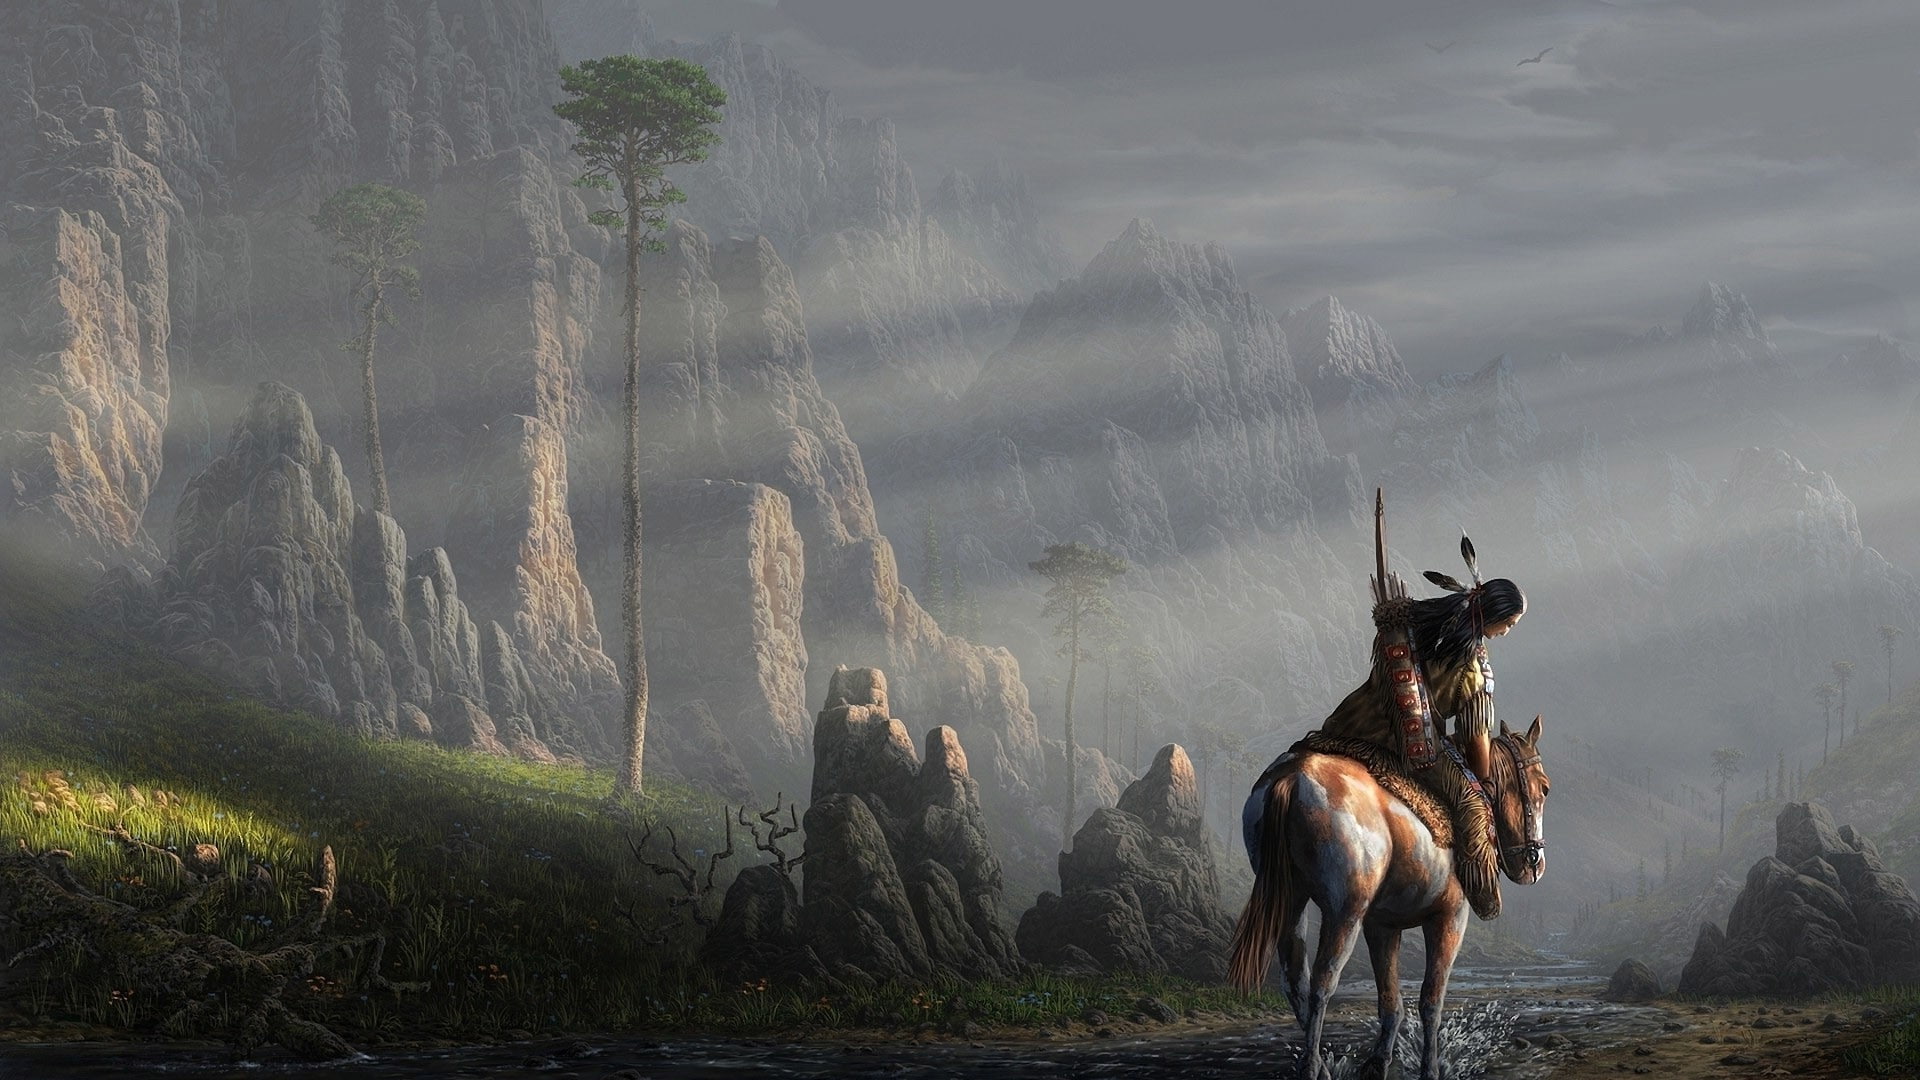 native american clothing nature artwork native americans trees animals horse men feathers arrows bows painting rock mountain stream sun rays warrior birds